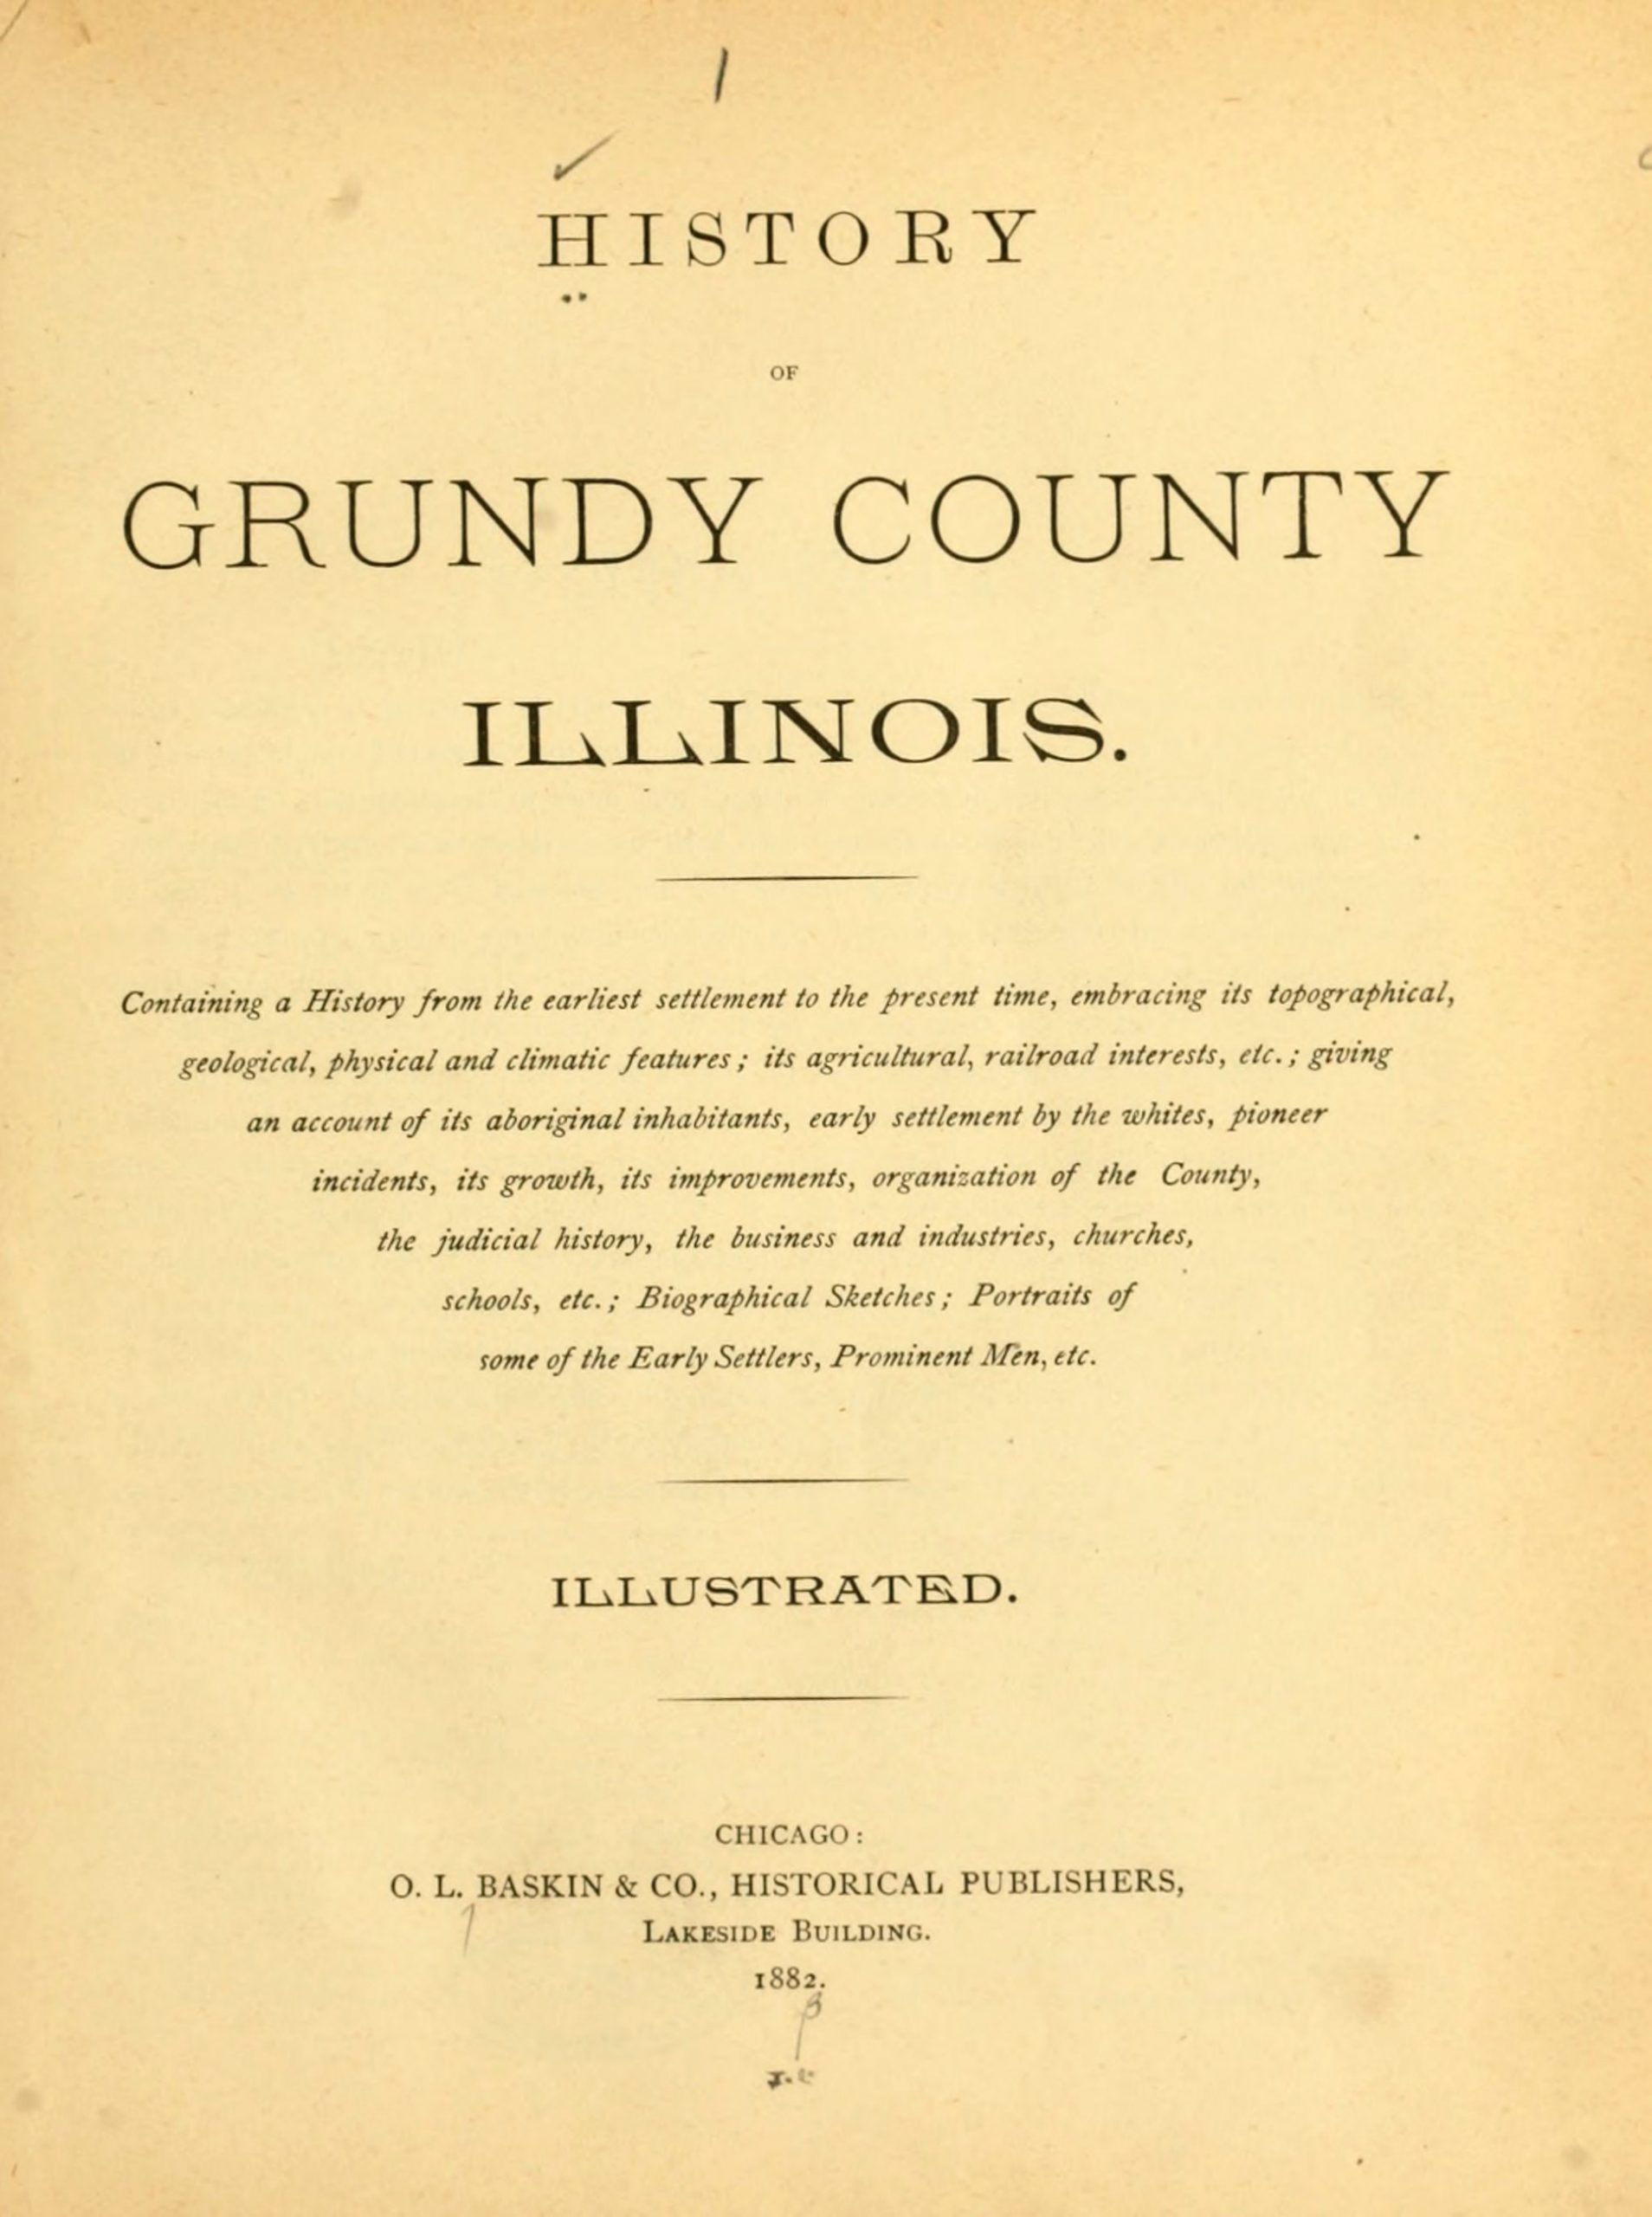 Cheap Vpn In Grundy Il Dans History Of Grundy County, Illinois. Library Of Congress